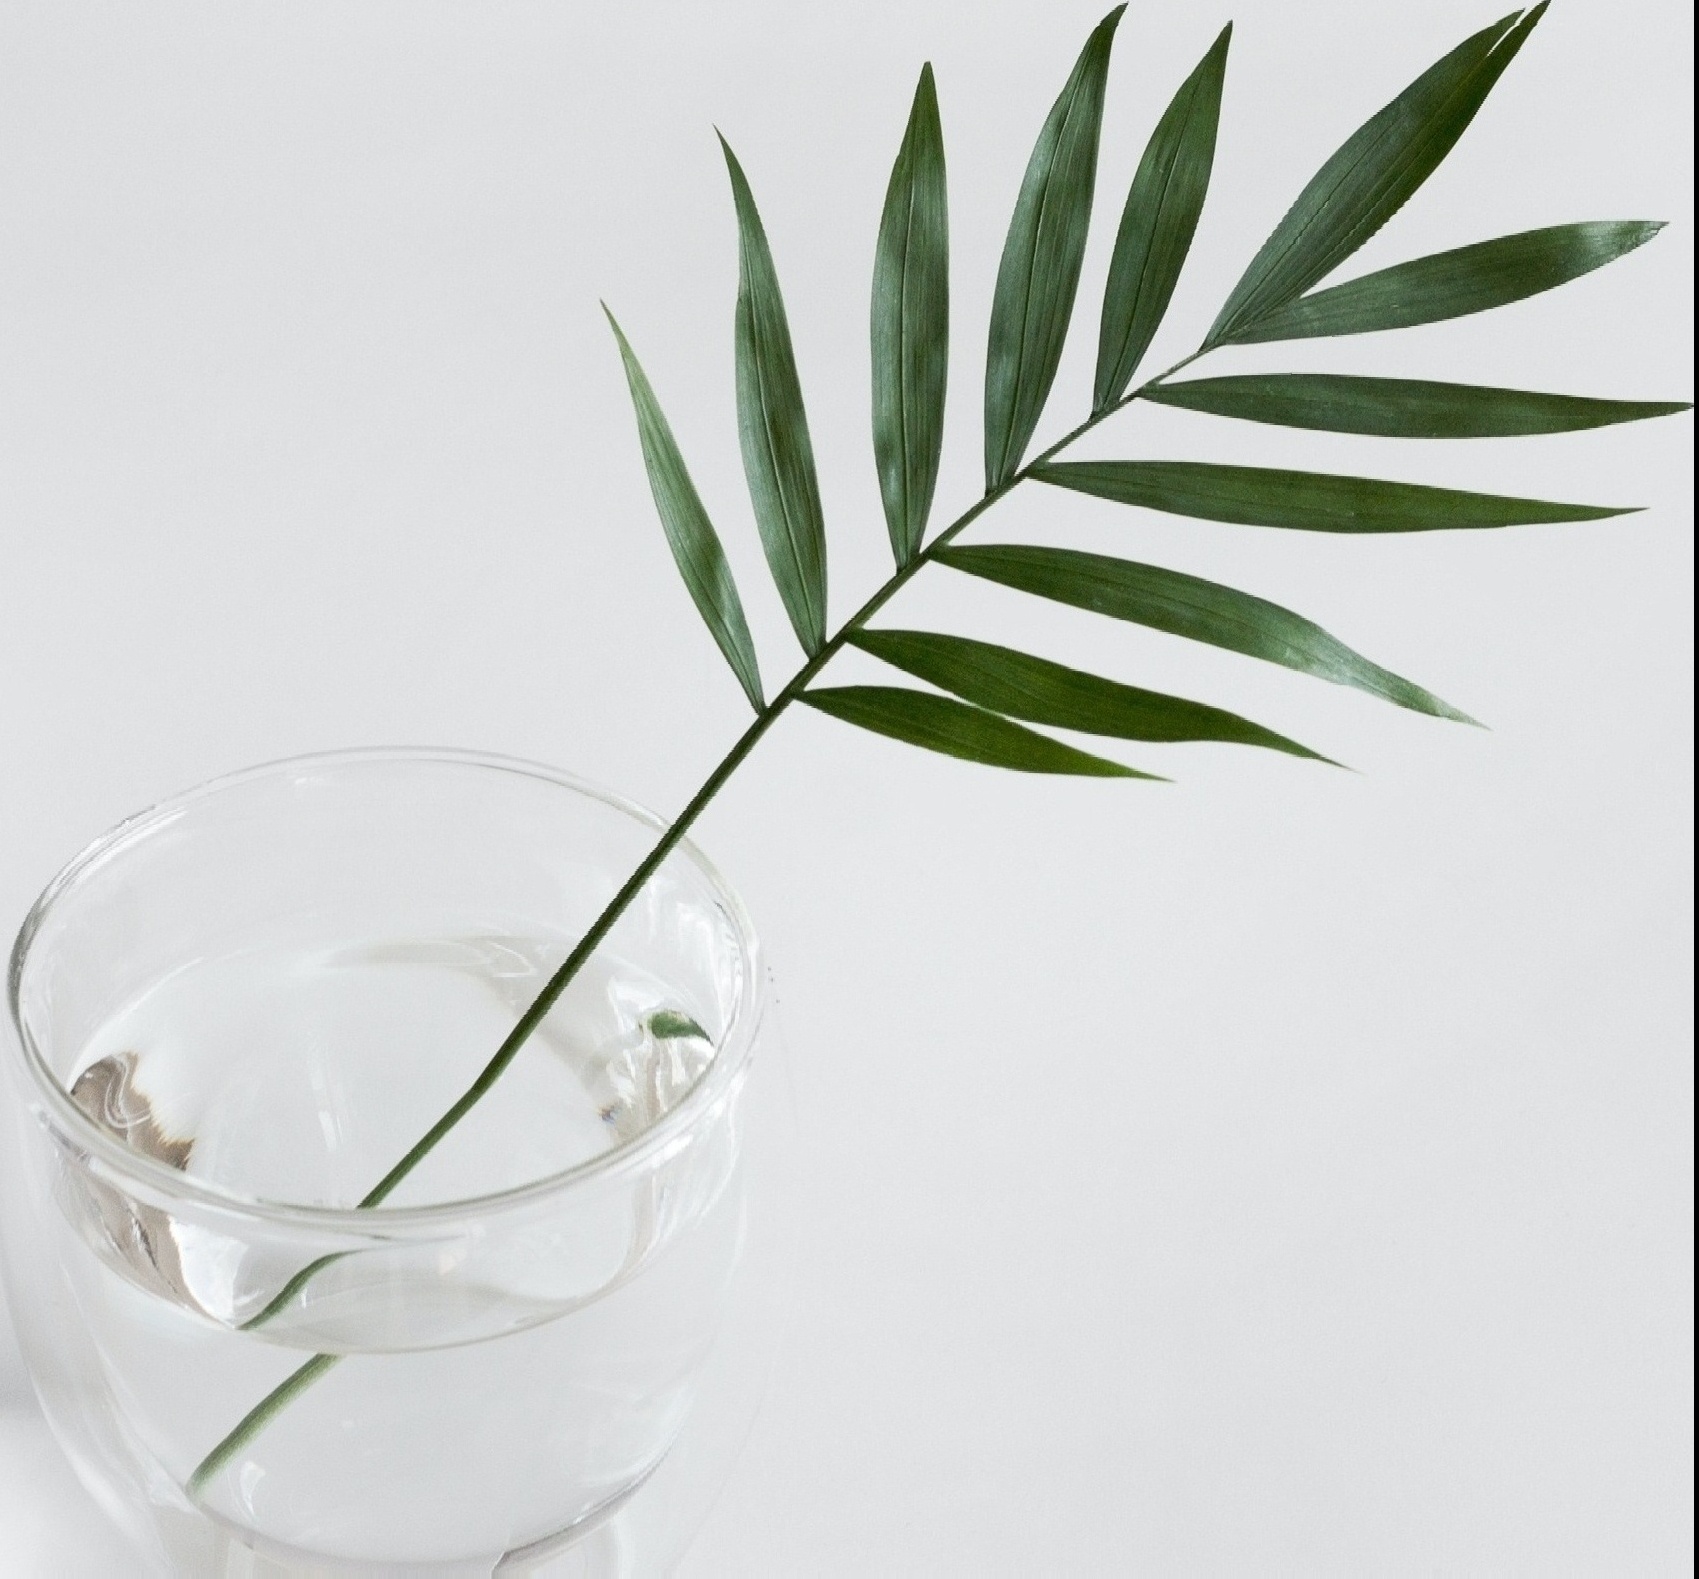 Image of a plain glass vase with one stem in it that has 12 leaves on it. Did you know that if you are going through a job change life transition counseling in Winter Park, FL will help. With guidance from a life transition therapist you will come through the change stronger and more emotionally stable. If you have questions call us today to talk about life transitions therapy in Orlando, FL 33301. Reach out now!